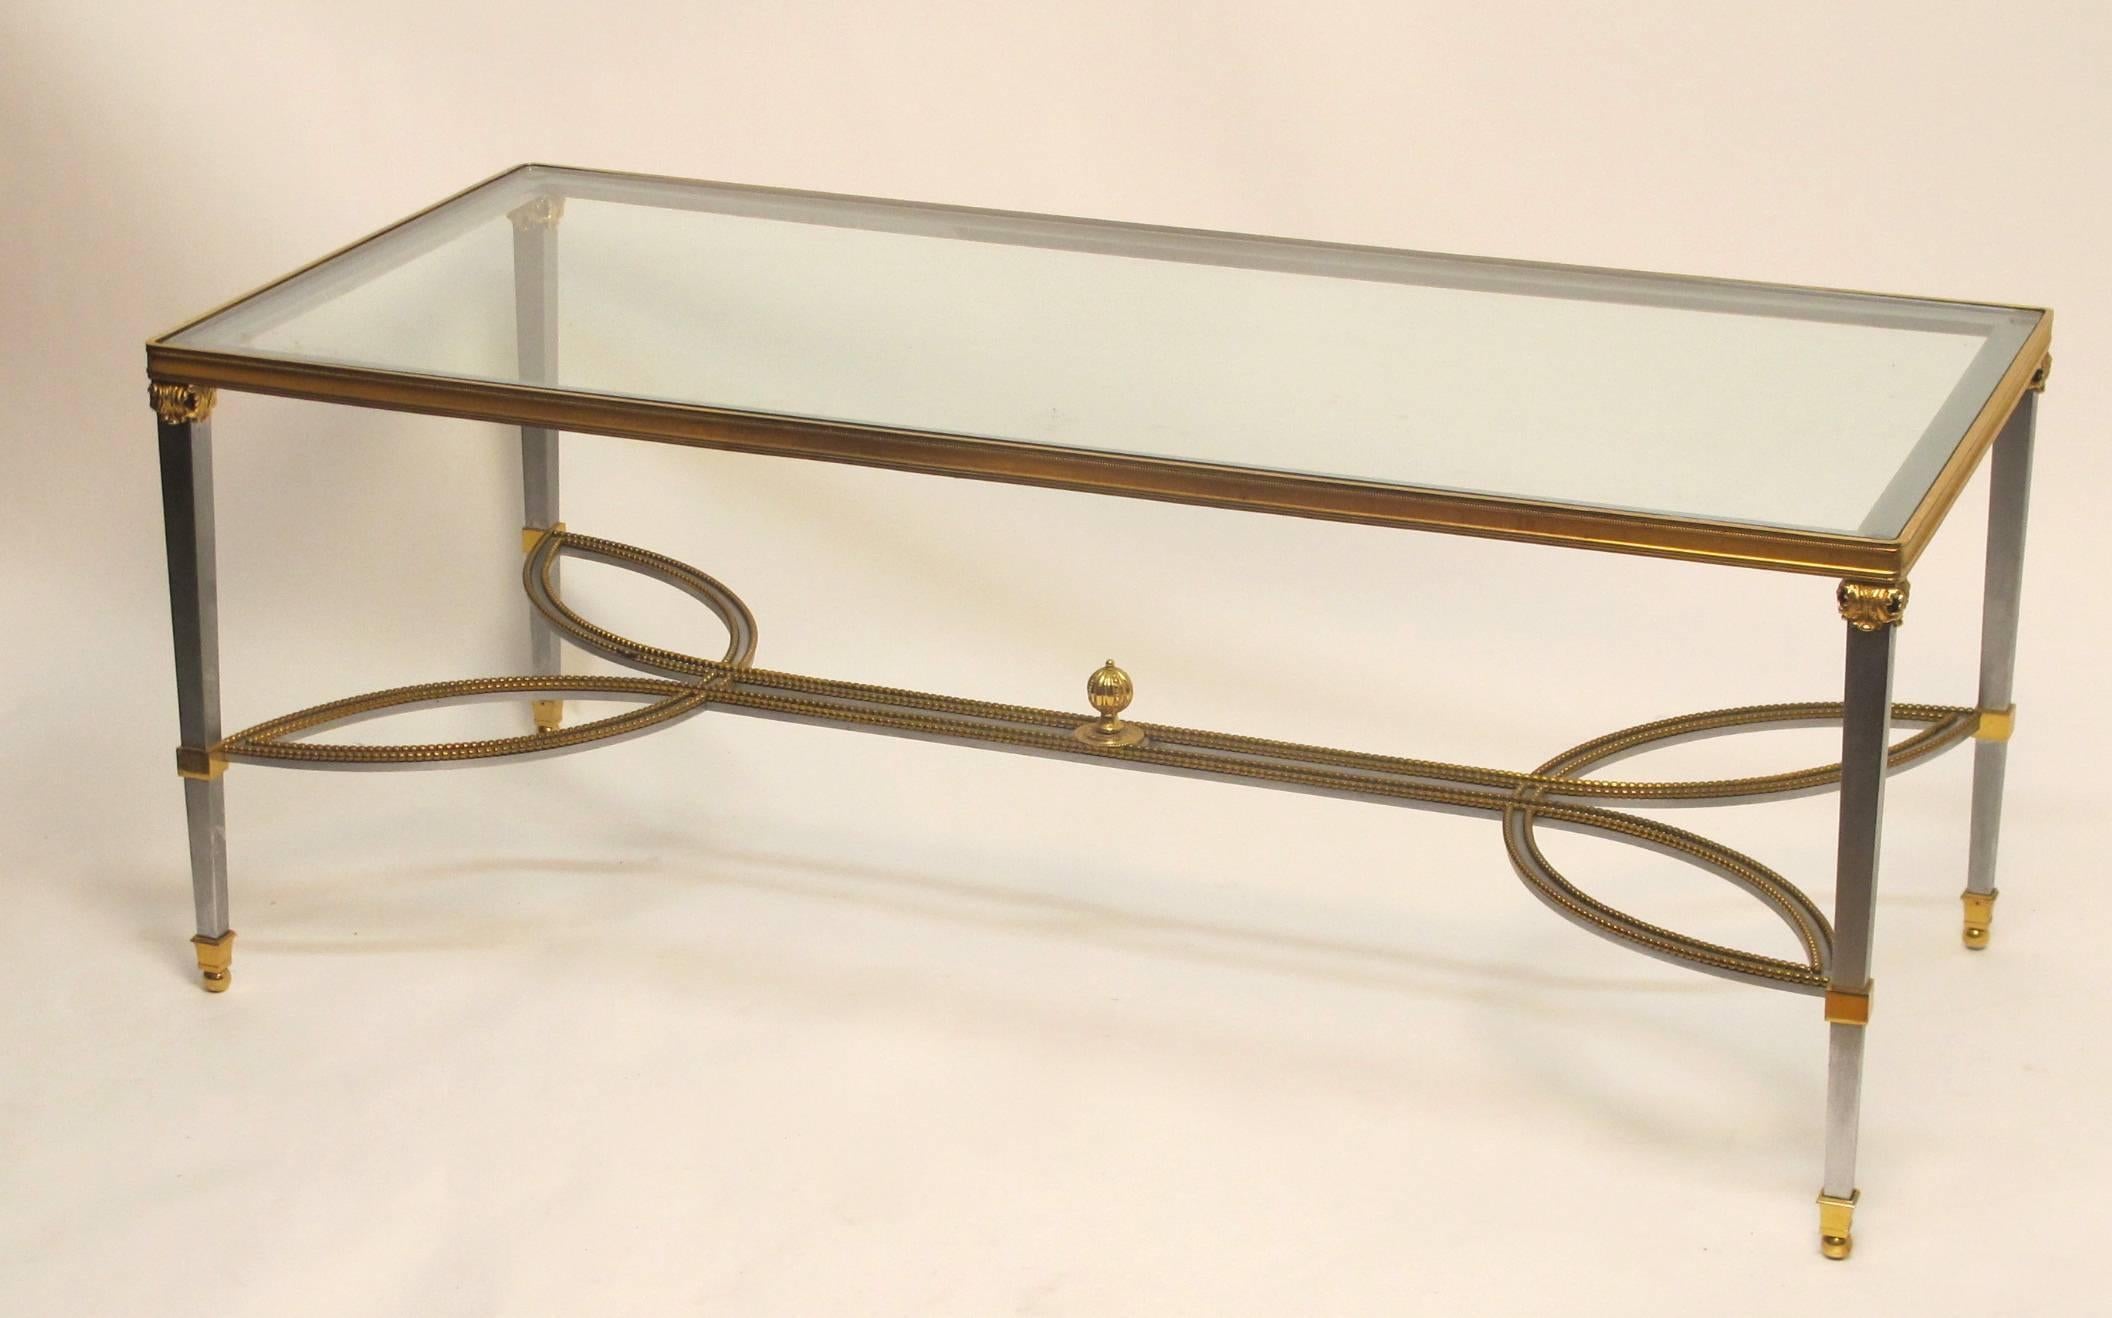 20th Century Steel Gilded Brass and Glass Coffee Table, circa 1970